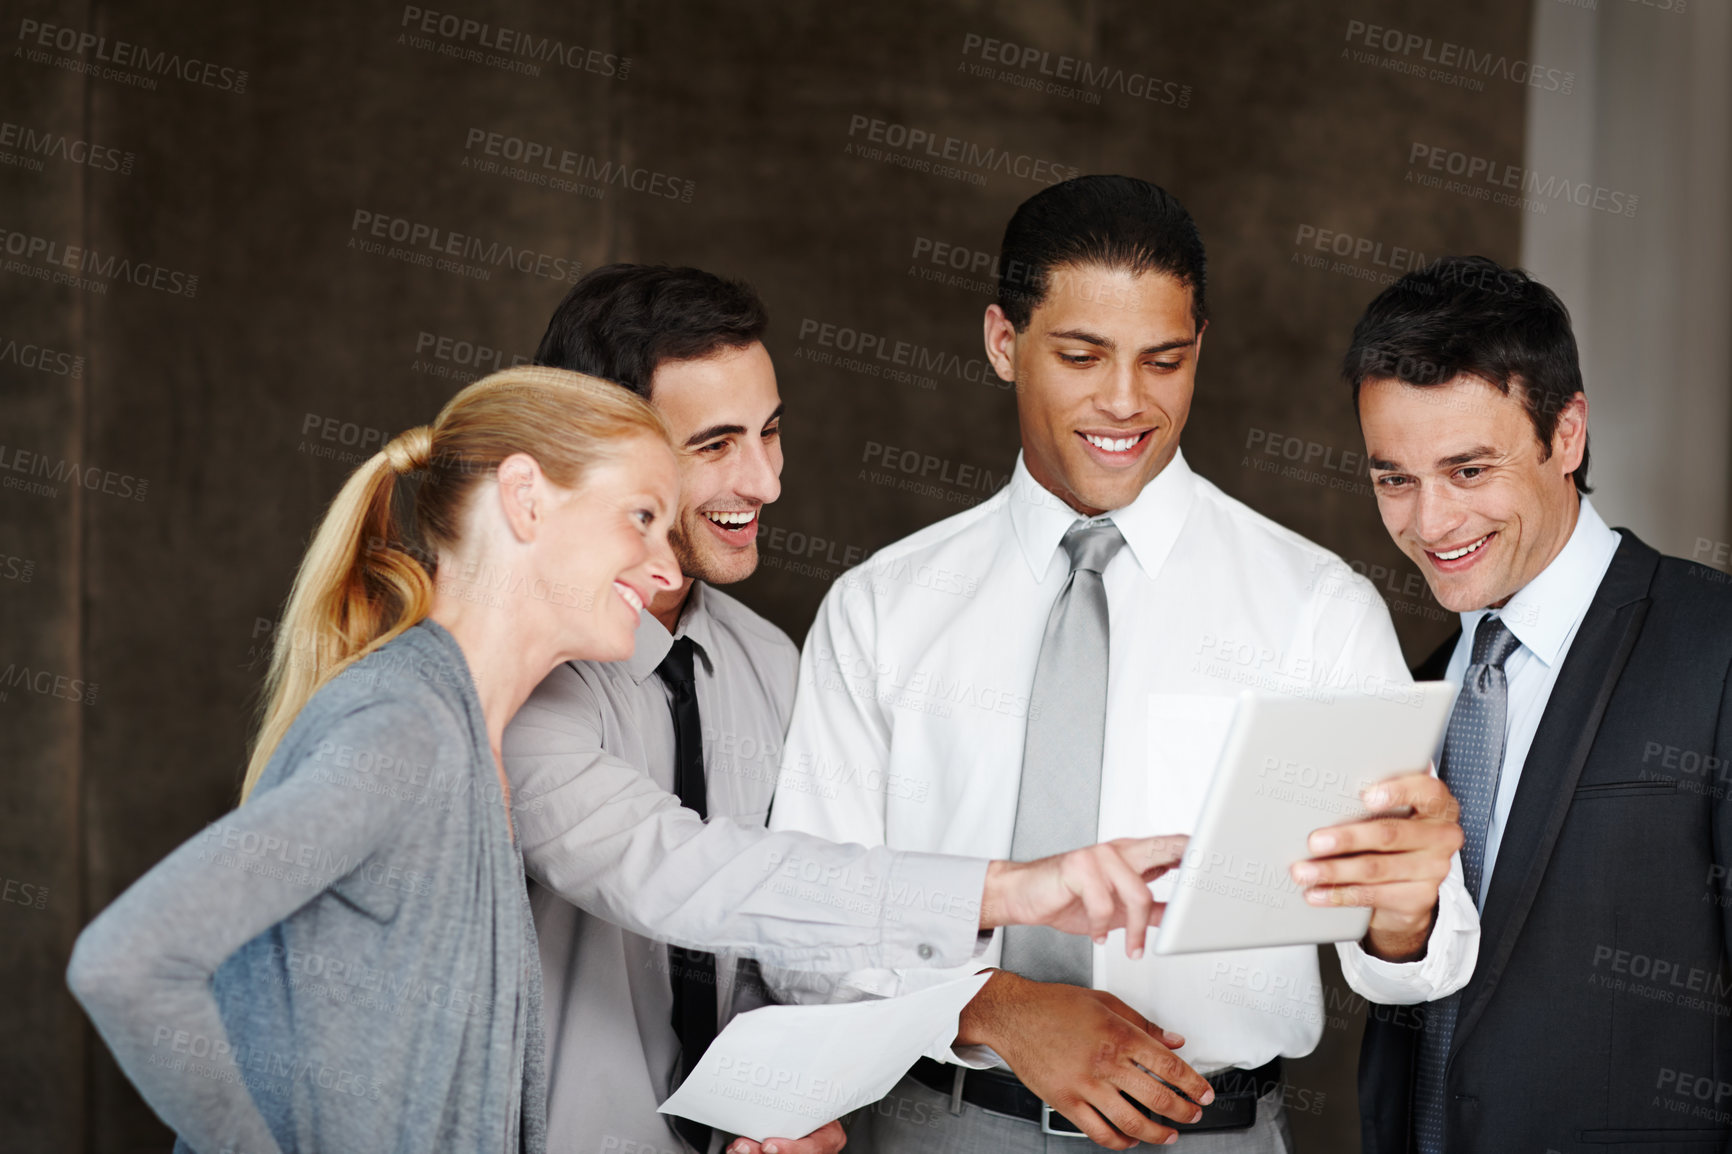 Buy stock photo Multi-ethnic group of businesspeople talking while using a digital tablet